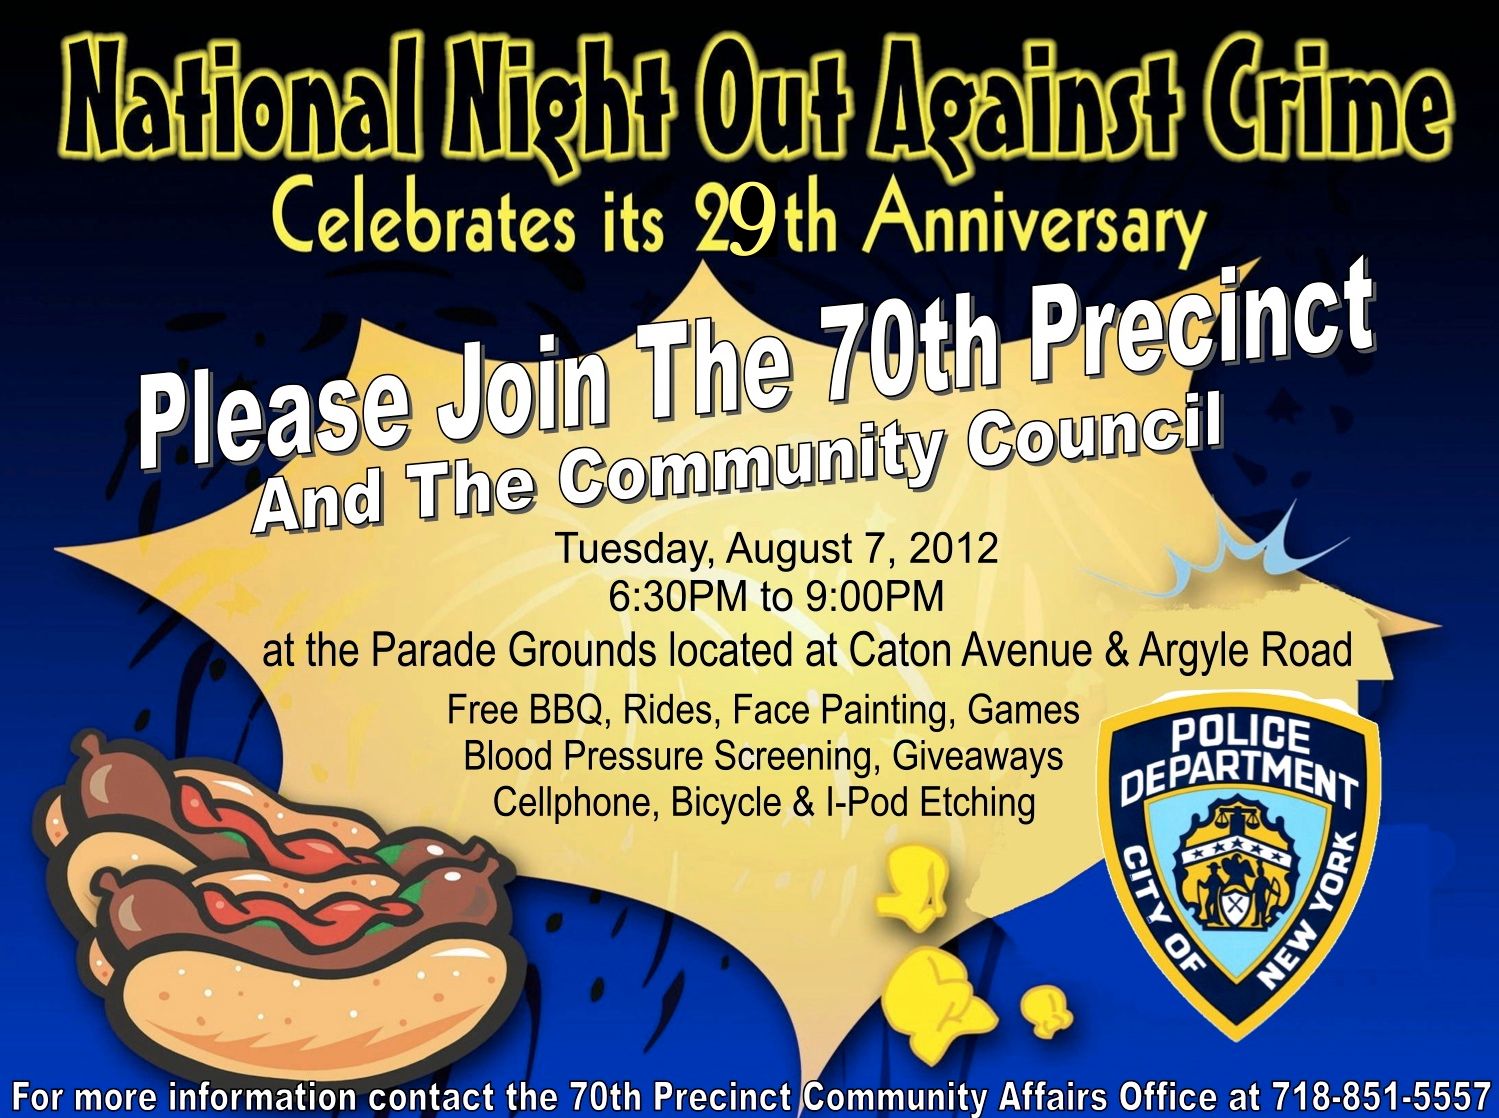 Join the 70th Precinct for the National Night Out Against Crime